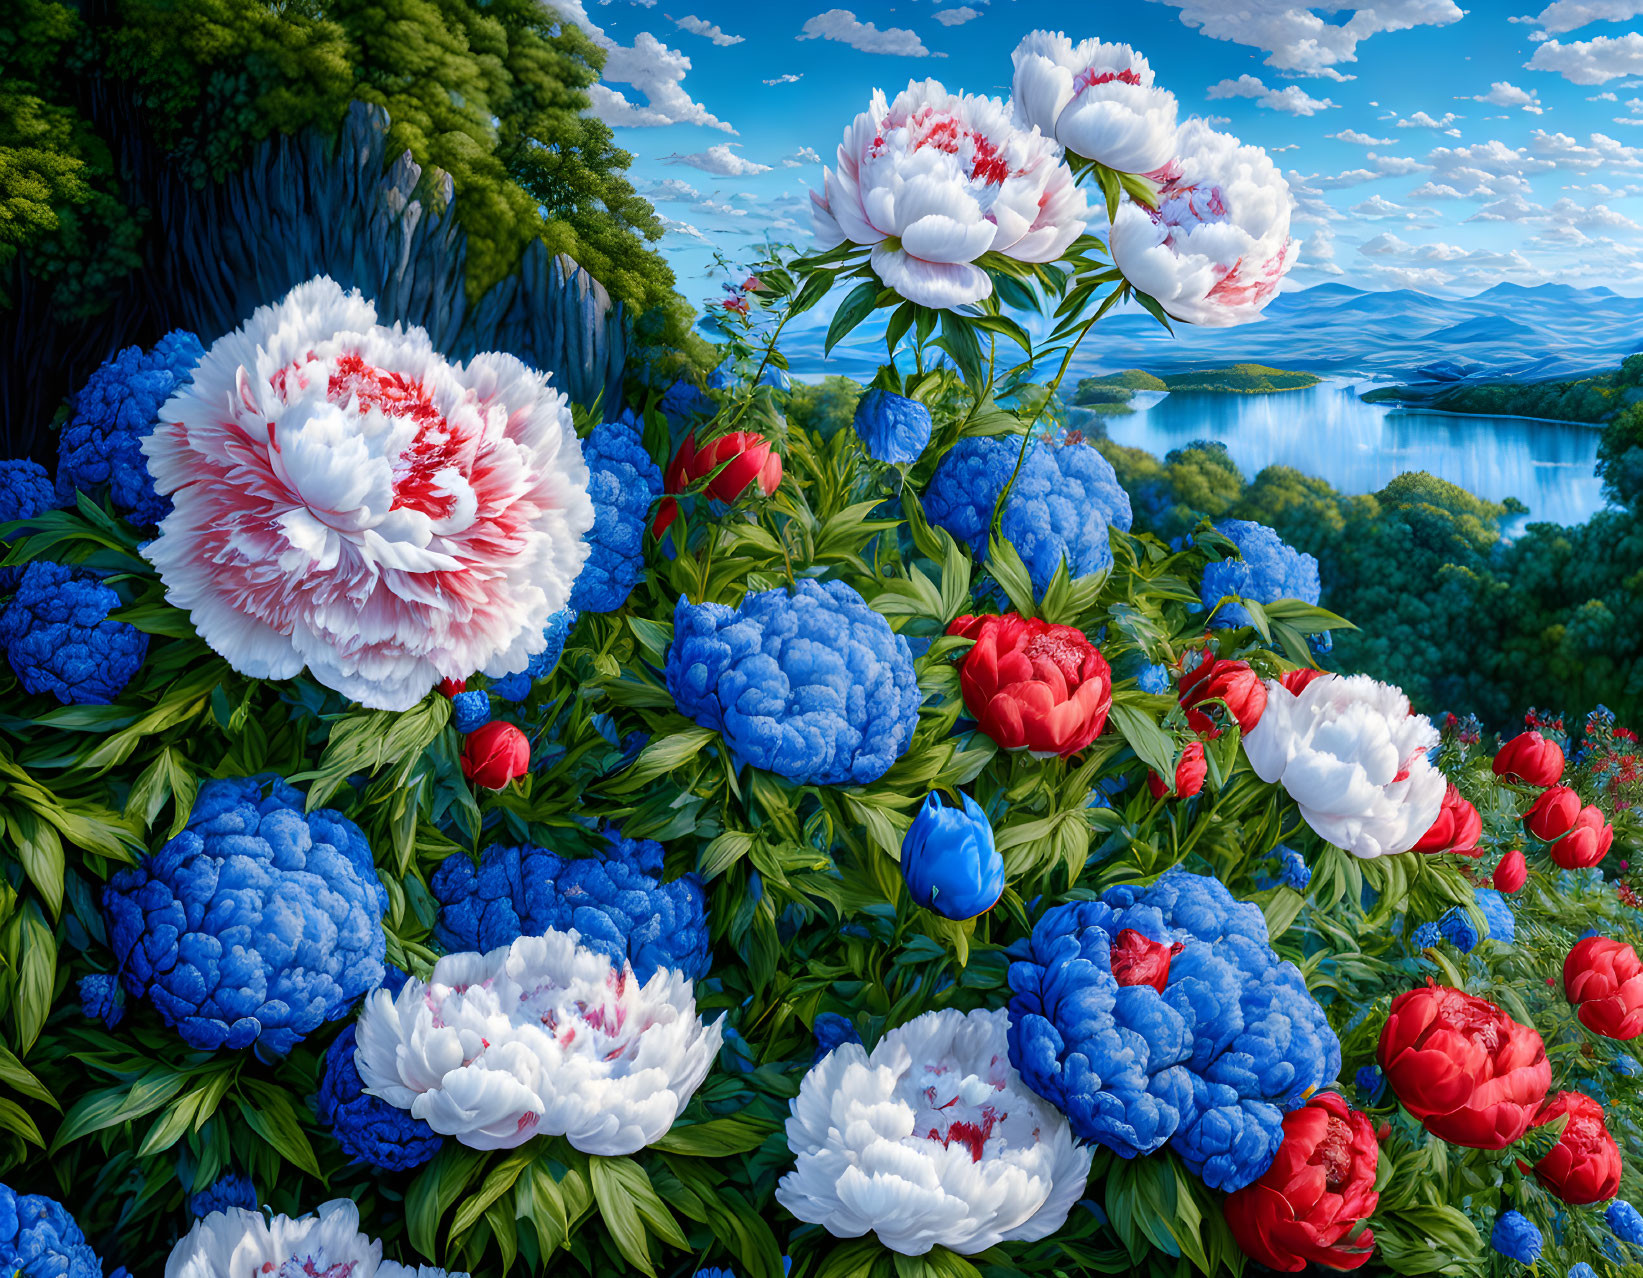 Vibrant blue and white peonies bloom by serene lake